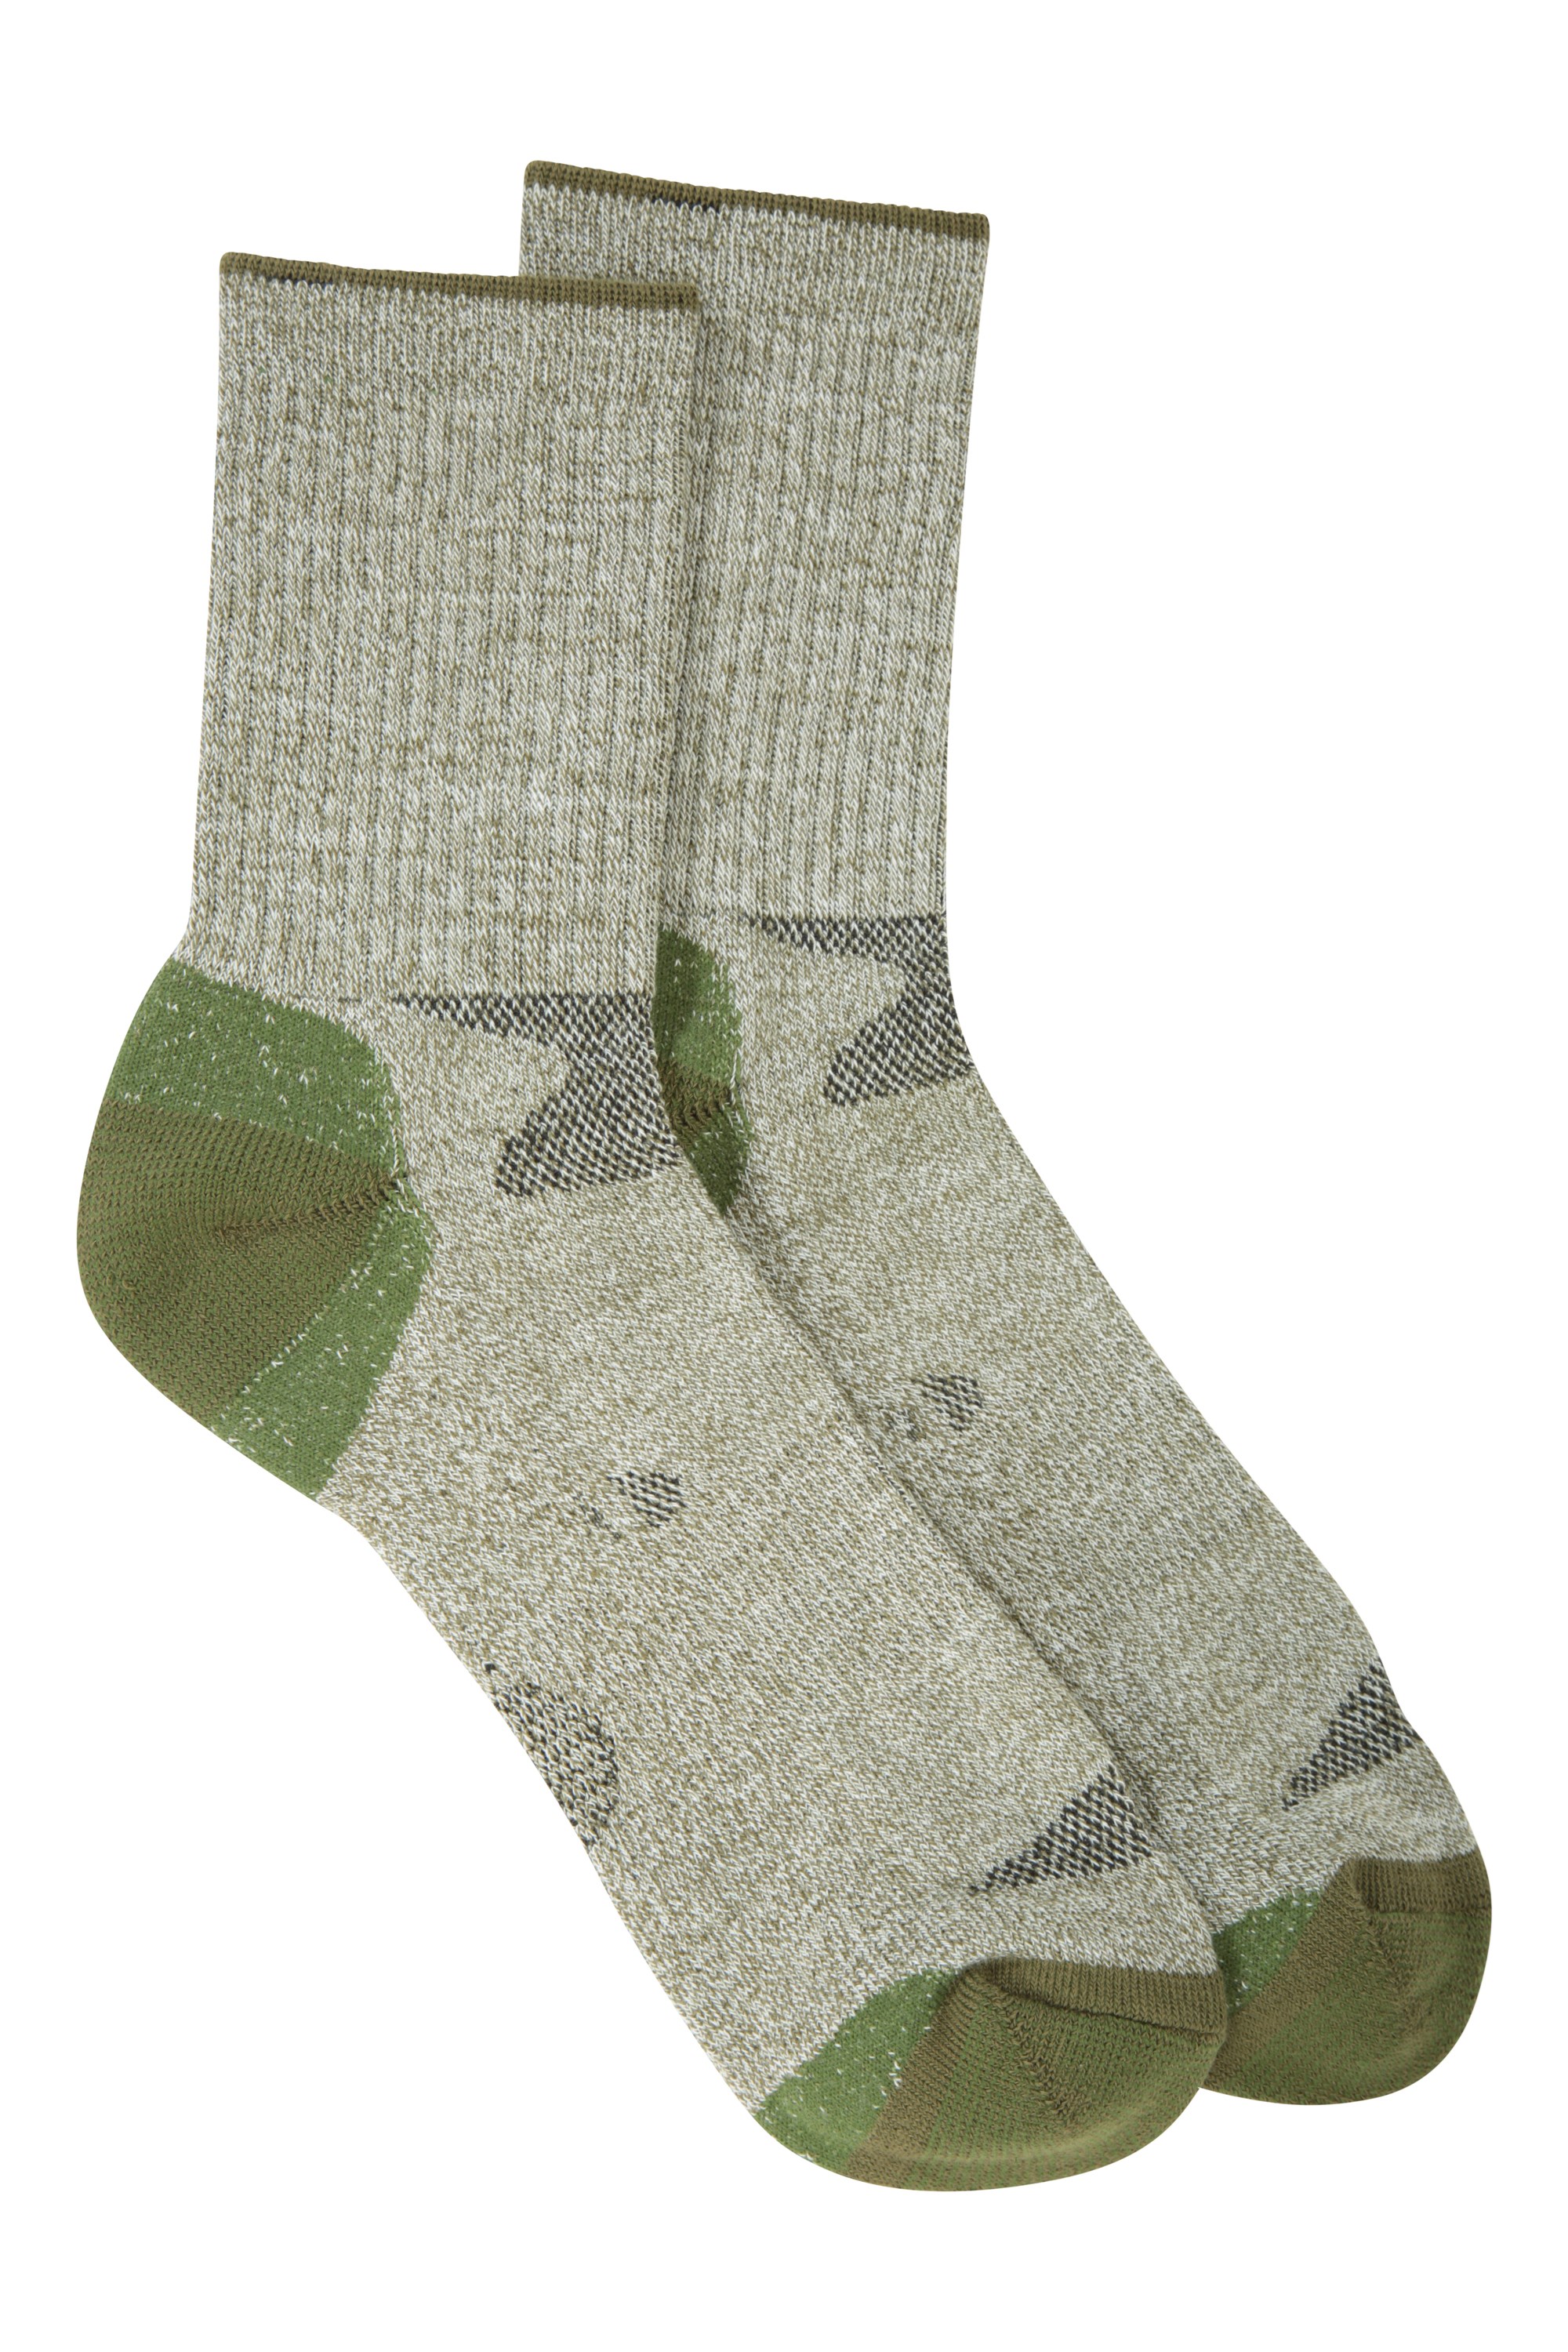 Mountain Warehouse Hommes IsoCool Outdoor Sock Chaussettes